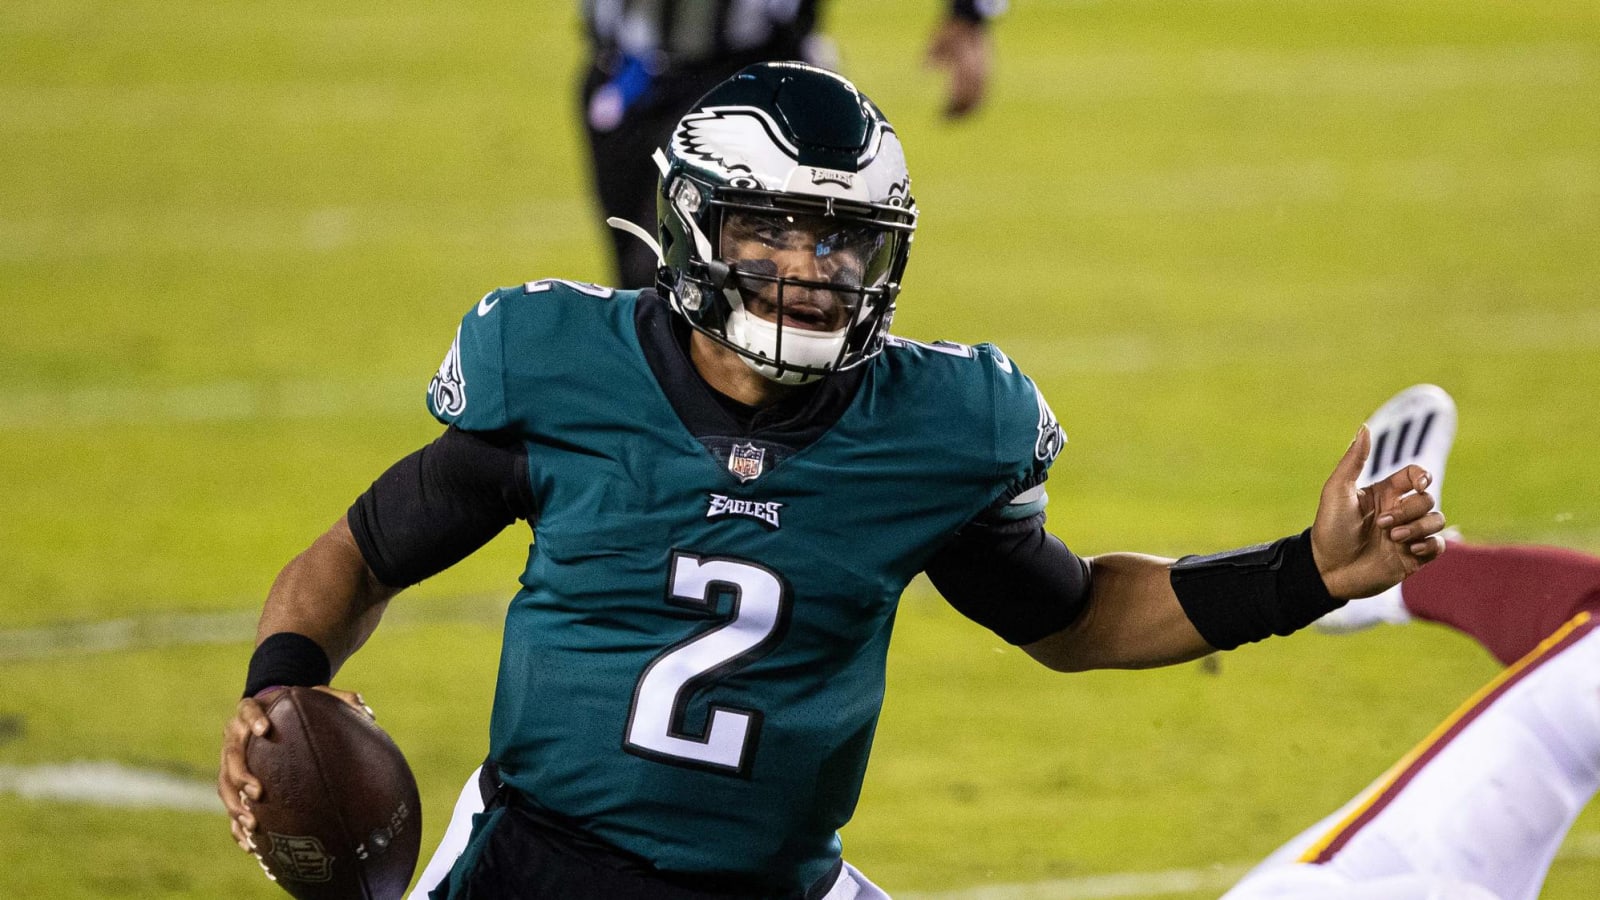 Eagles coach Nick Sirianni says Jalen Hurts is 'relentless' in pursuit of starting QB job